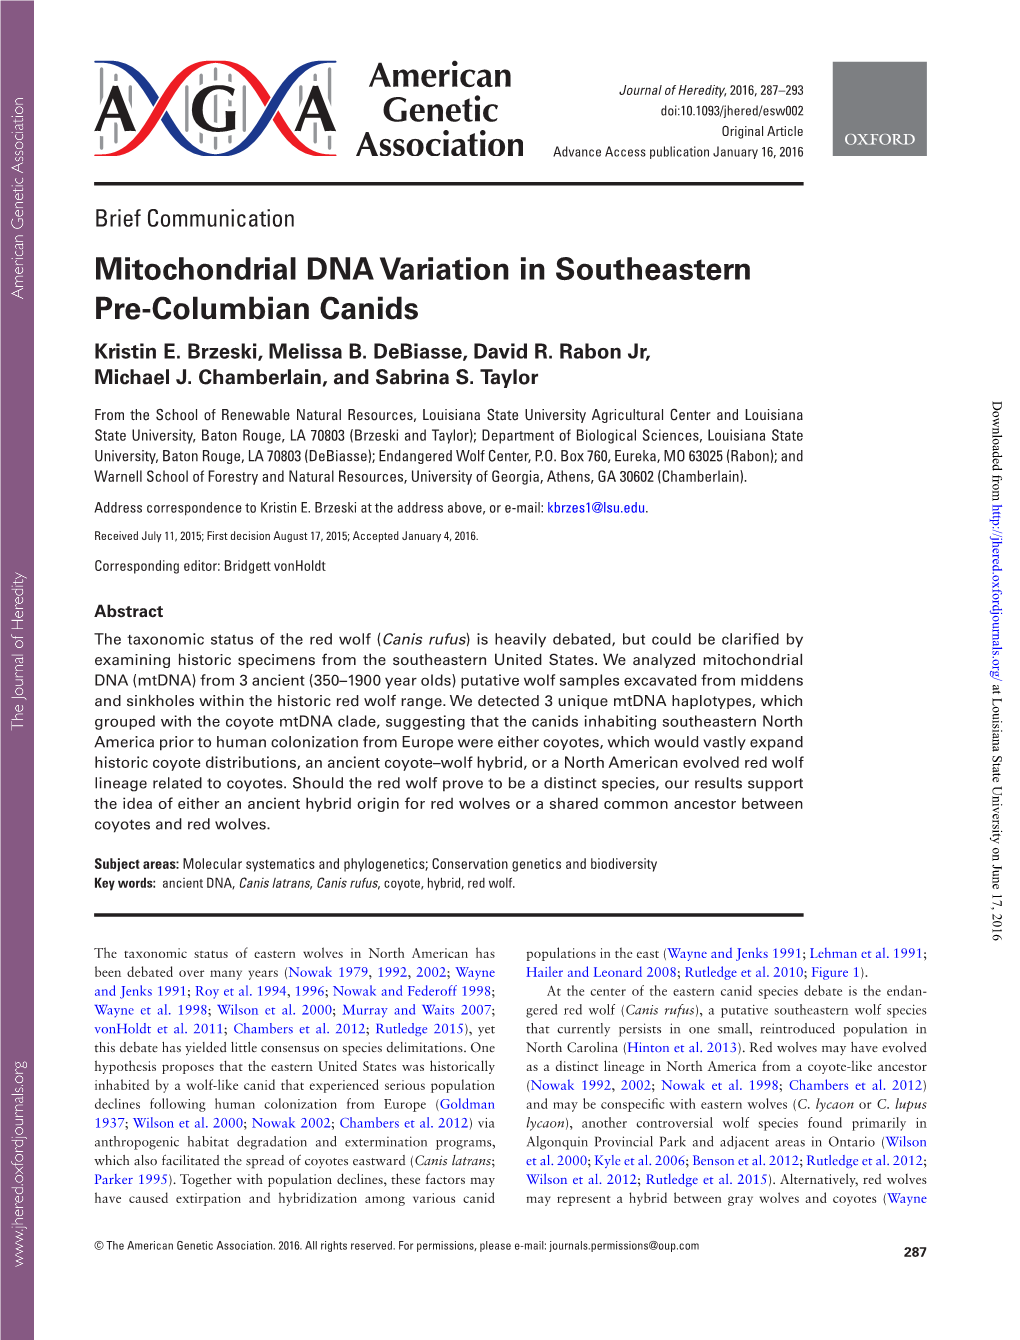 Mitochondrial DNA Variation in Southeastern Pre-Columbian Canids Kristin E